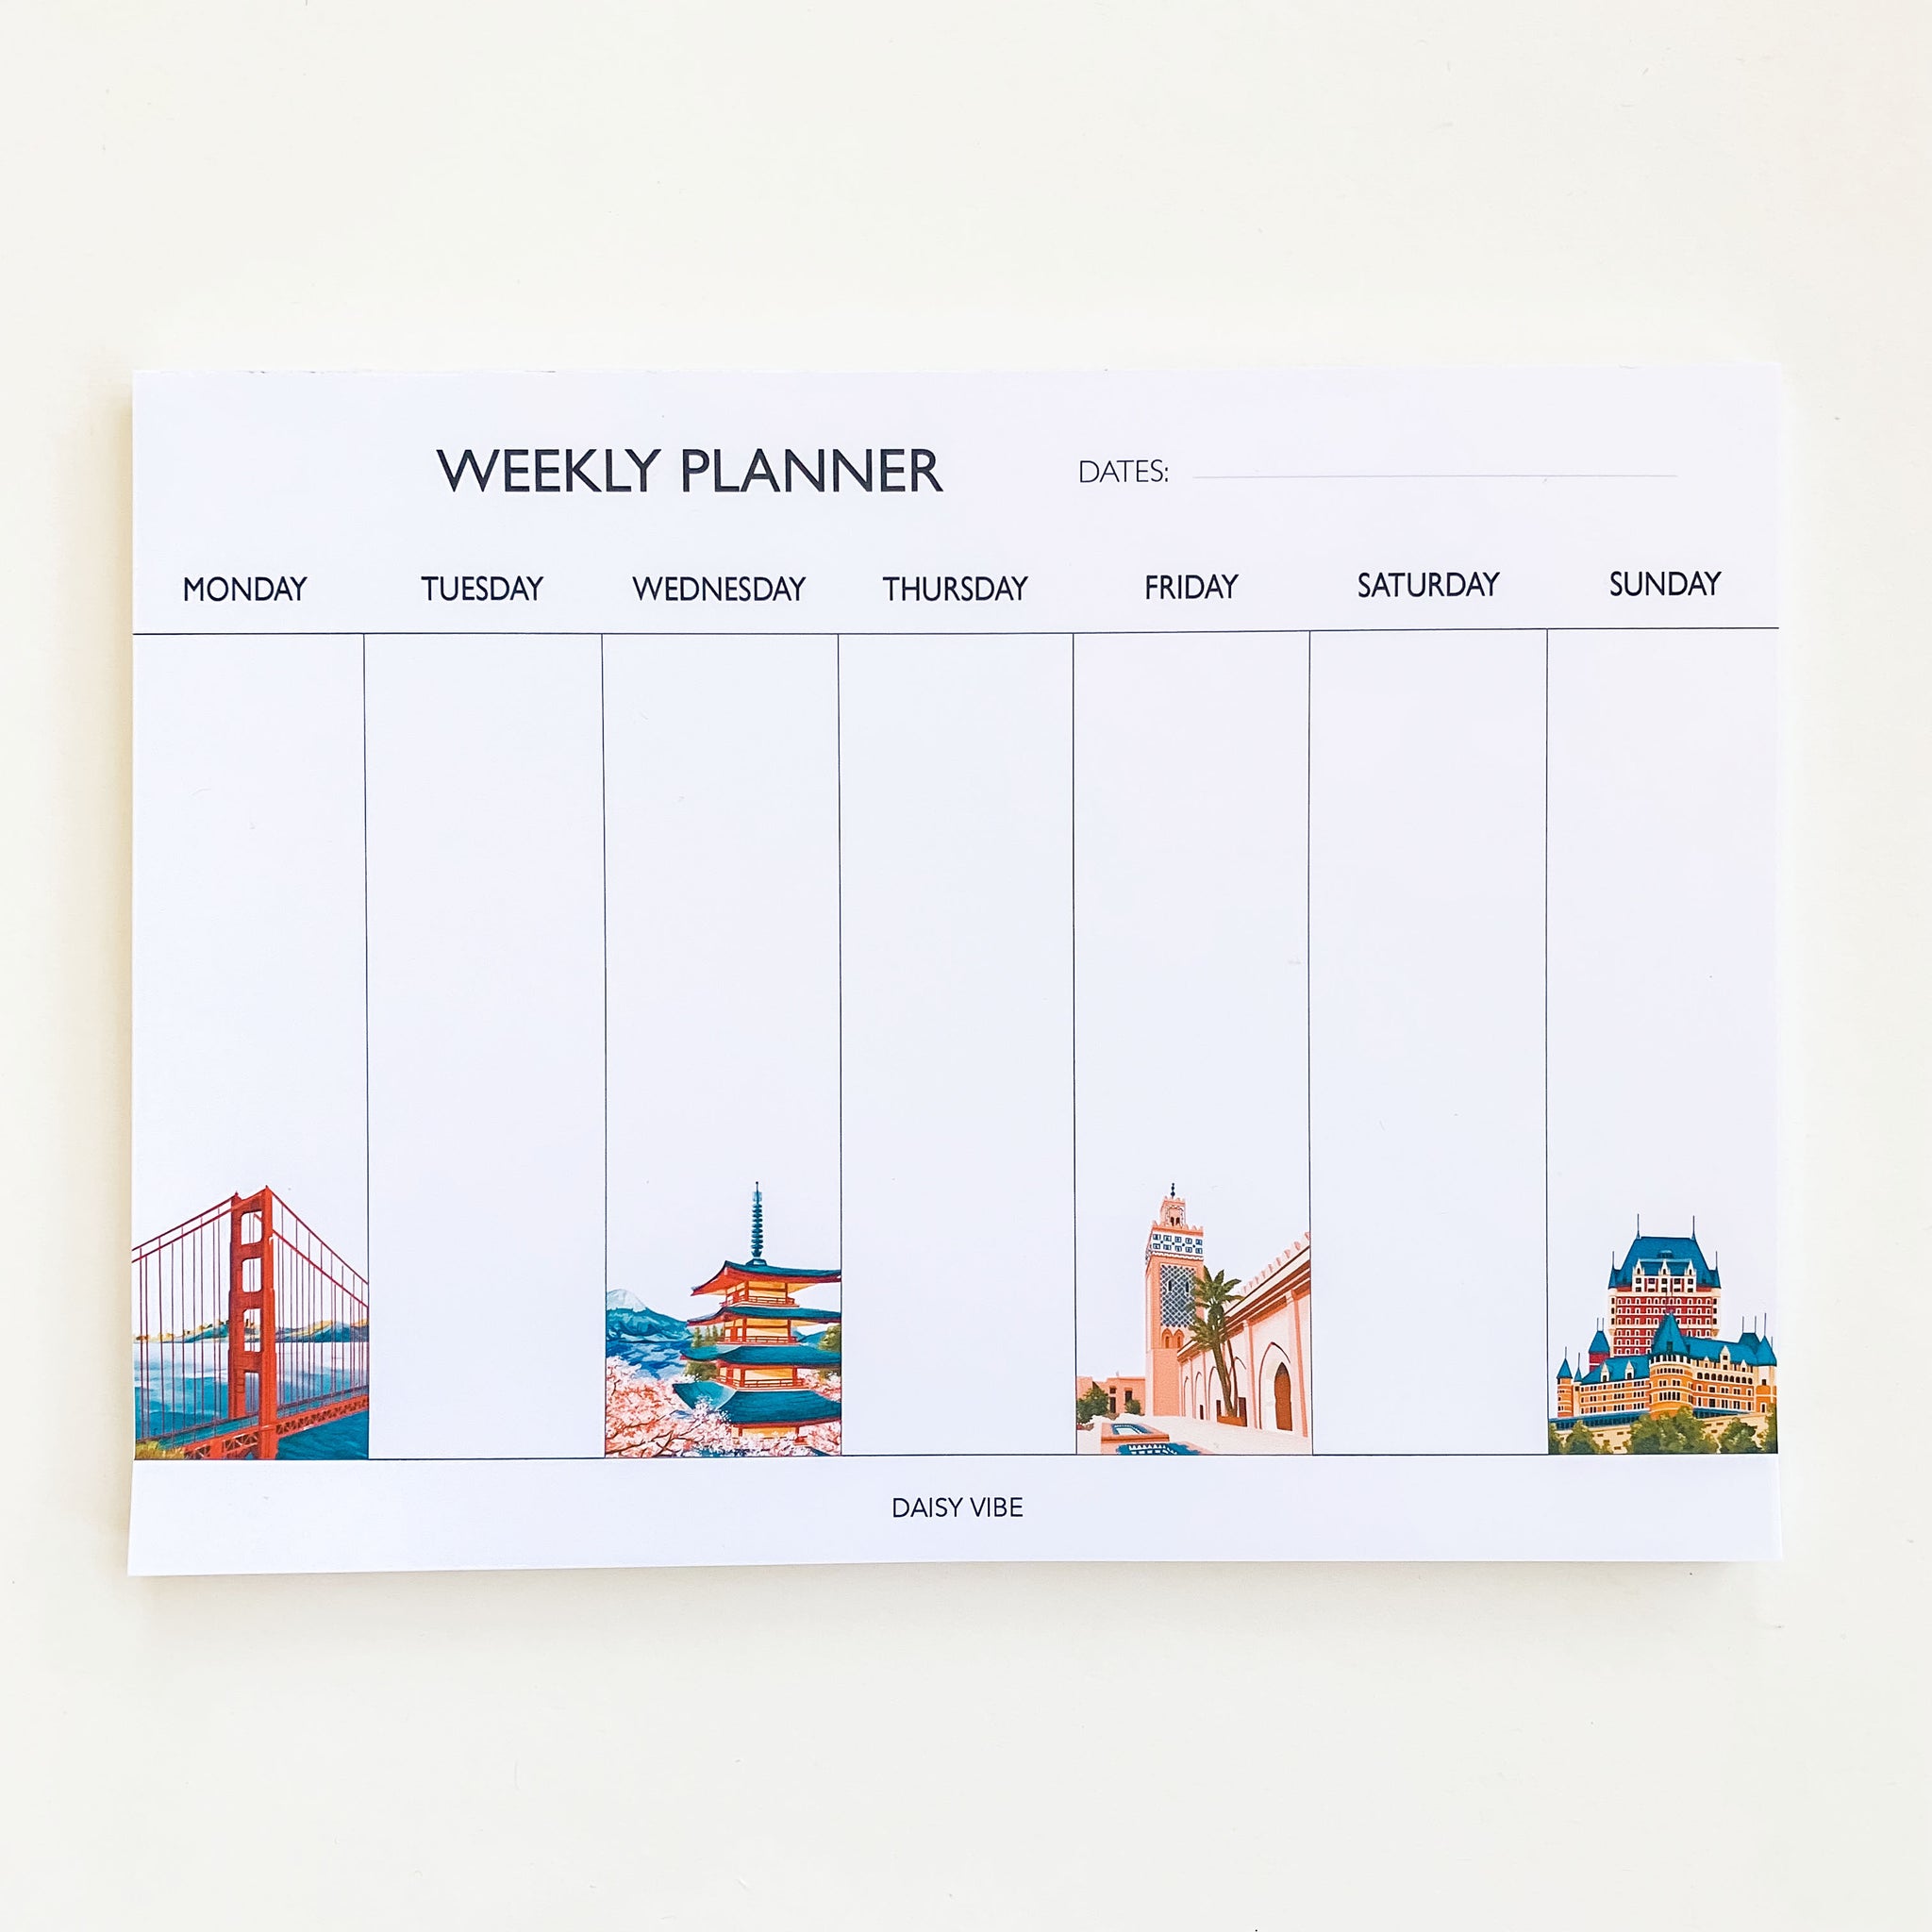 Weekly Planner - No.1